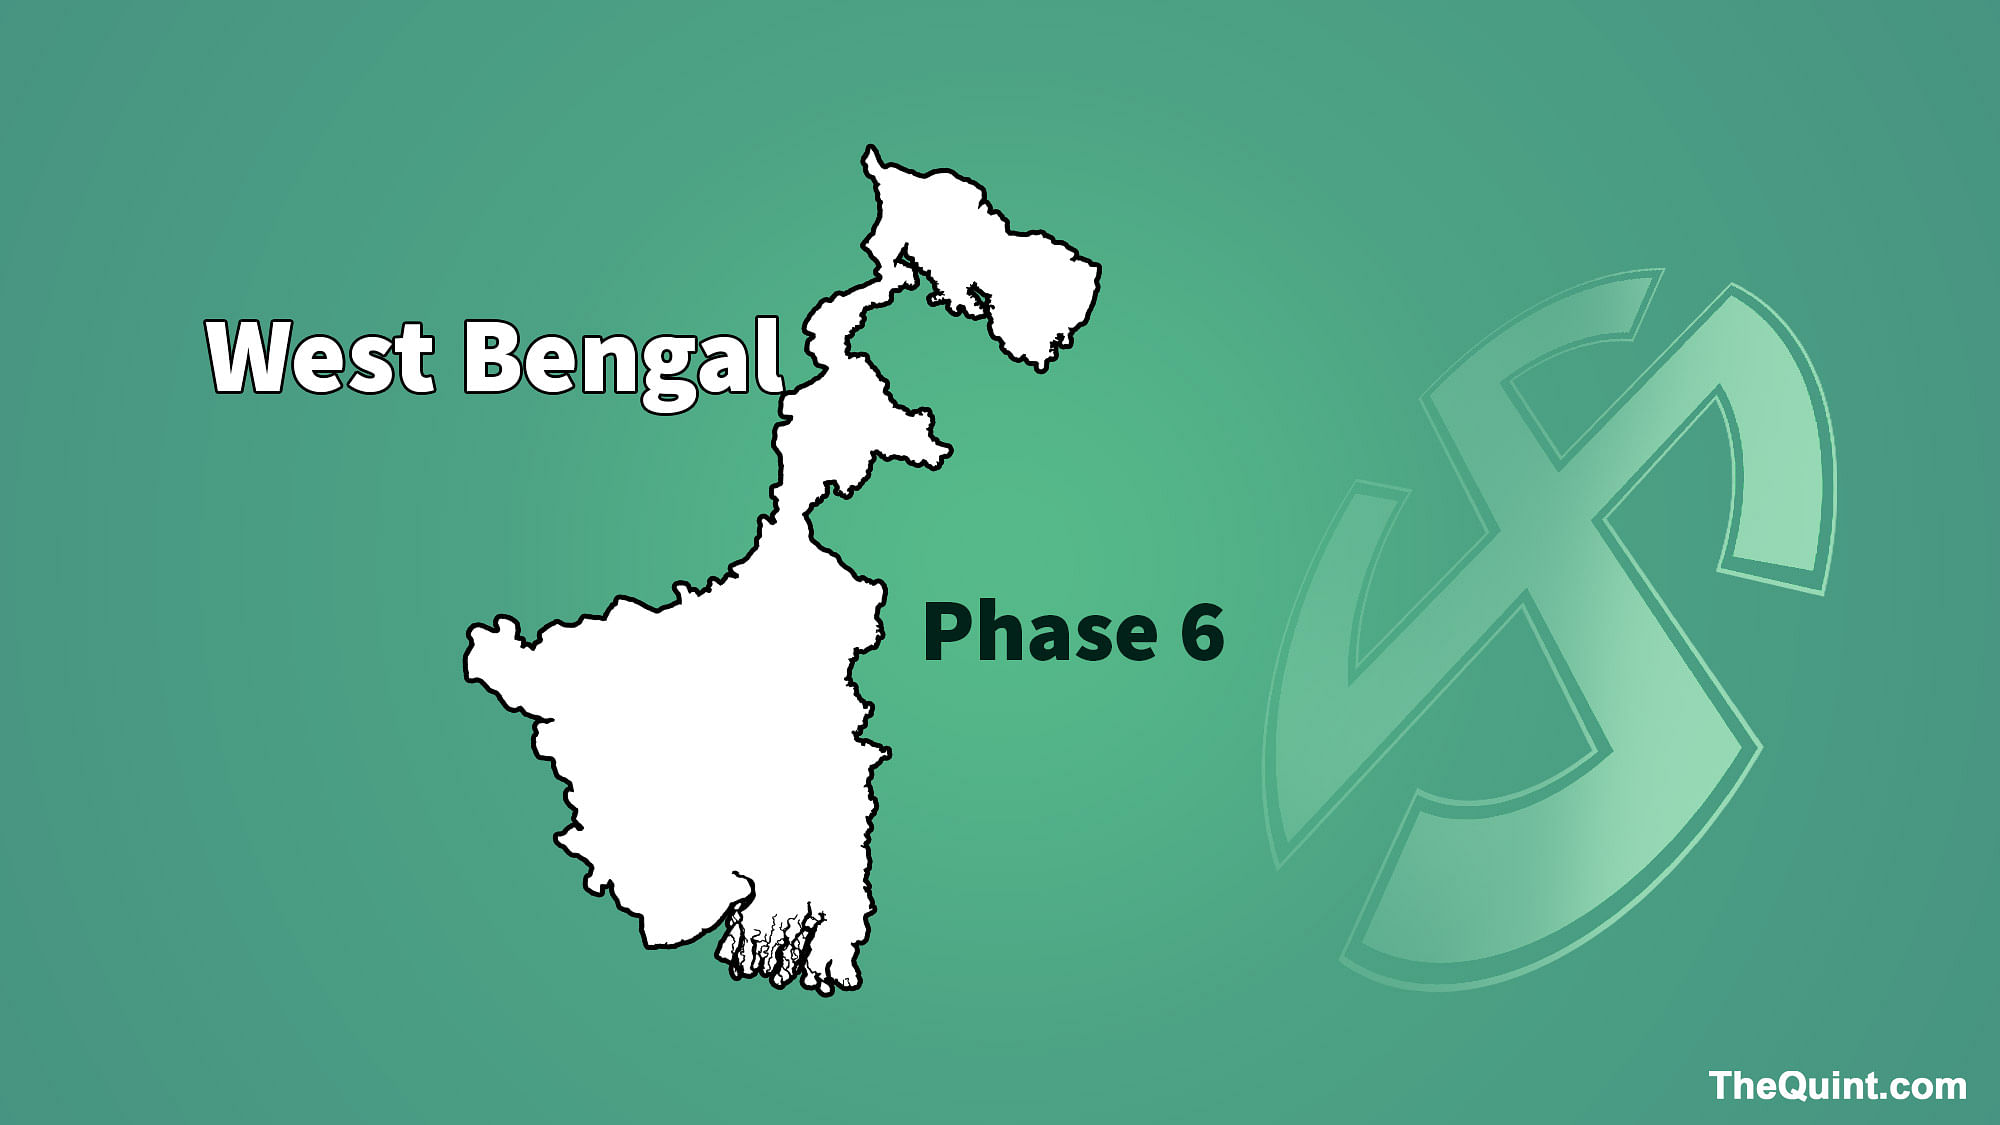 The main contenders in the final phase will be Trinamool Congress and Left-Congress alliance (Photo Courtesy: <b>The Quint</b>) 